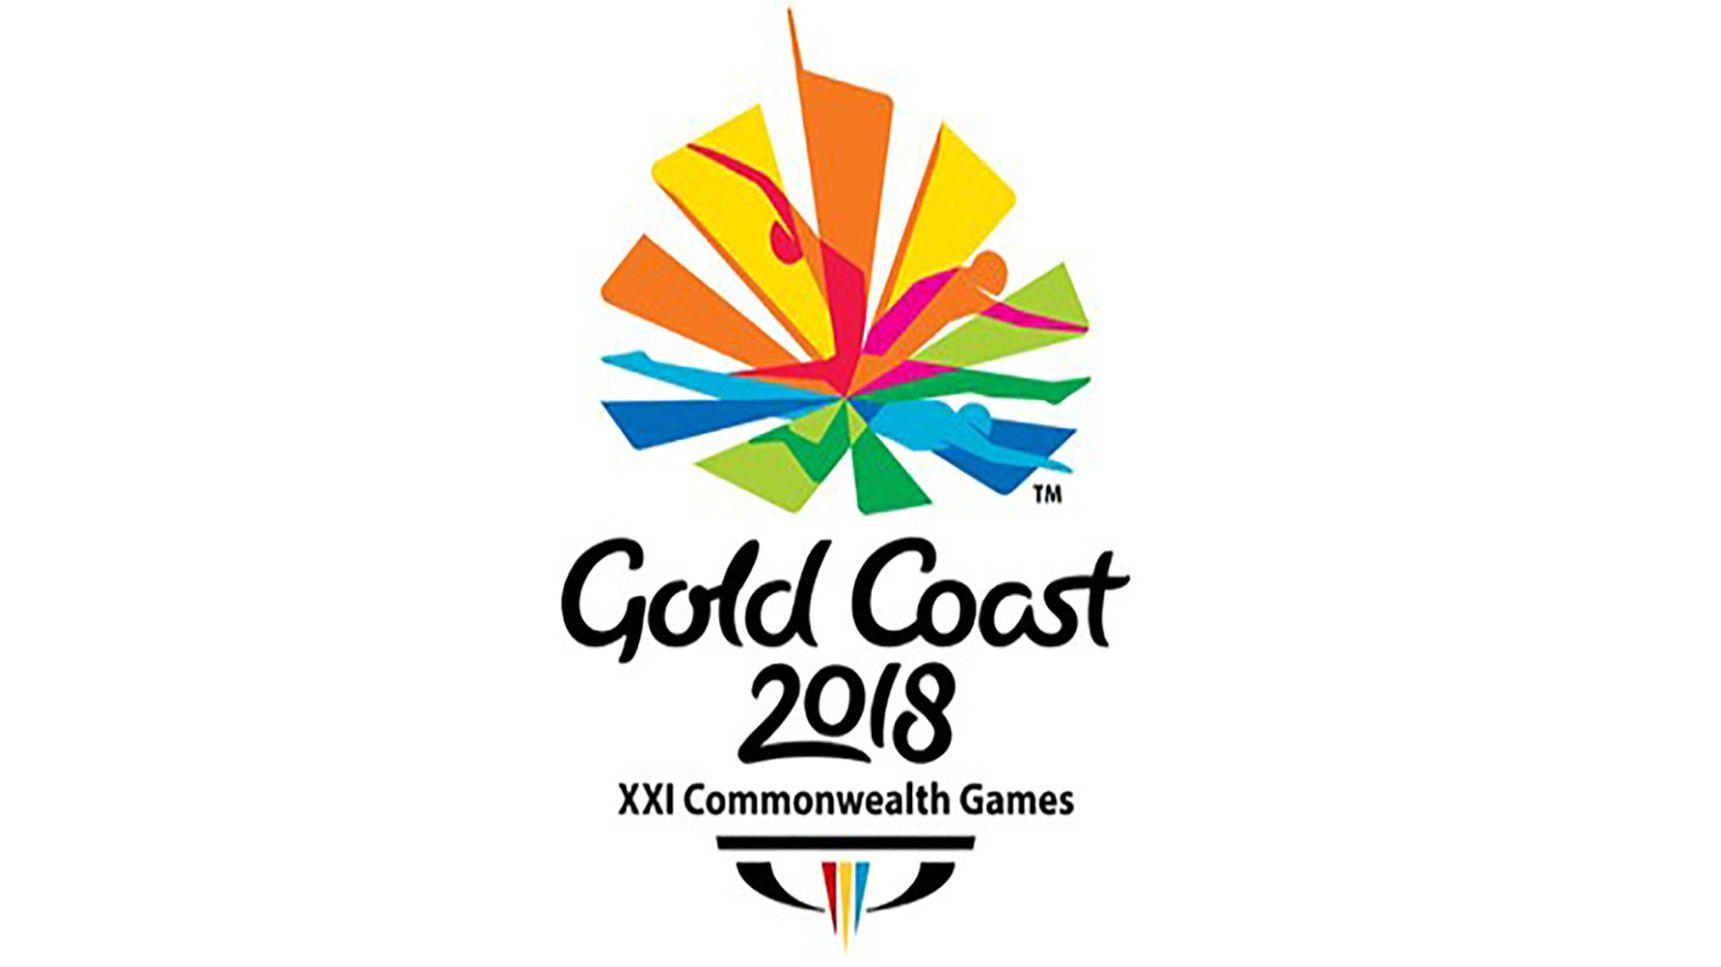 Commonwealth Logo - Commonwealth Games Schedules & Results. Northern Ireland